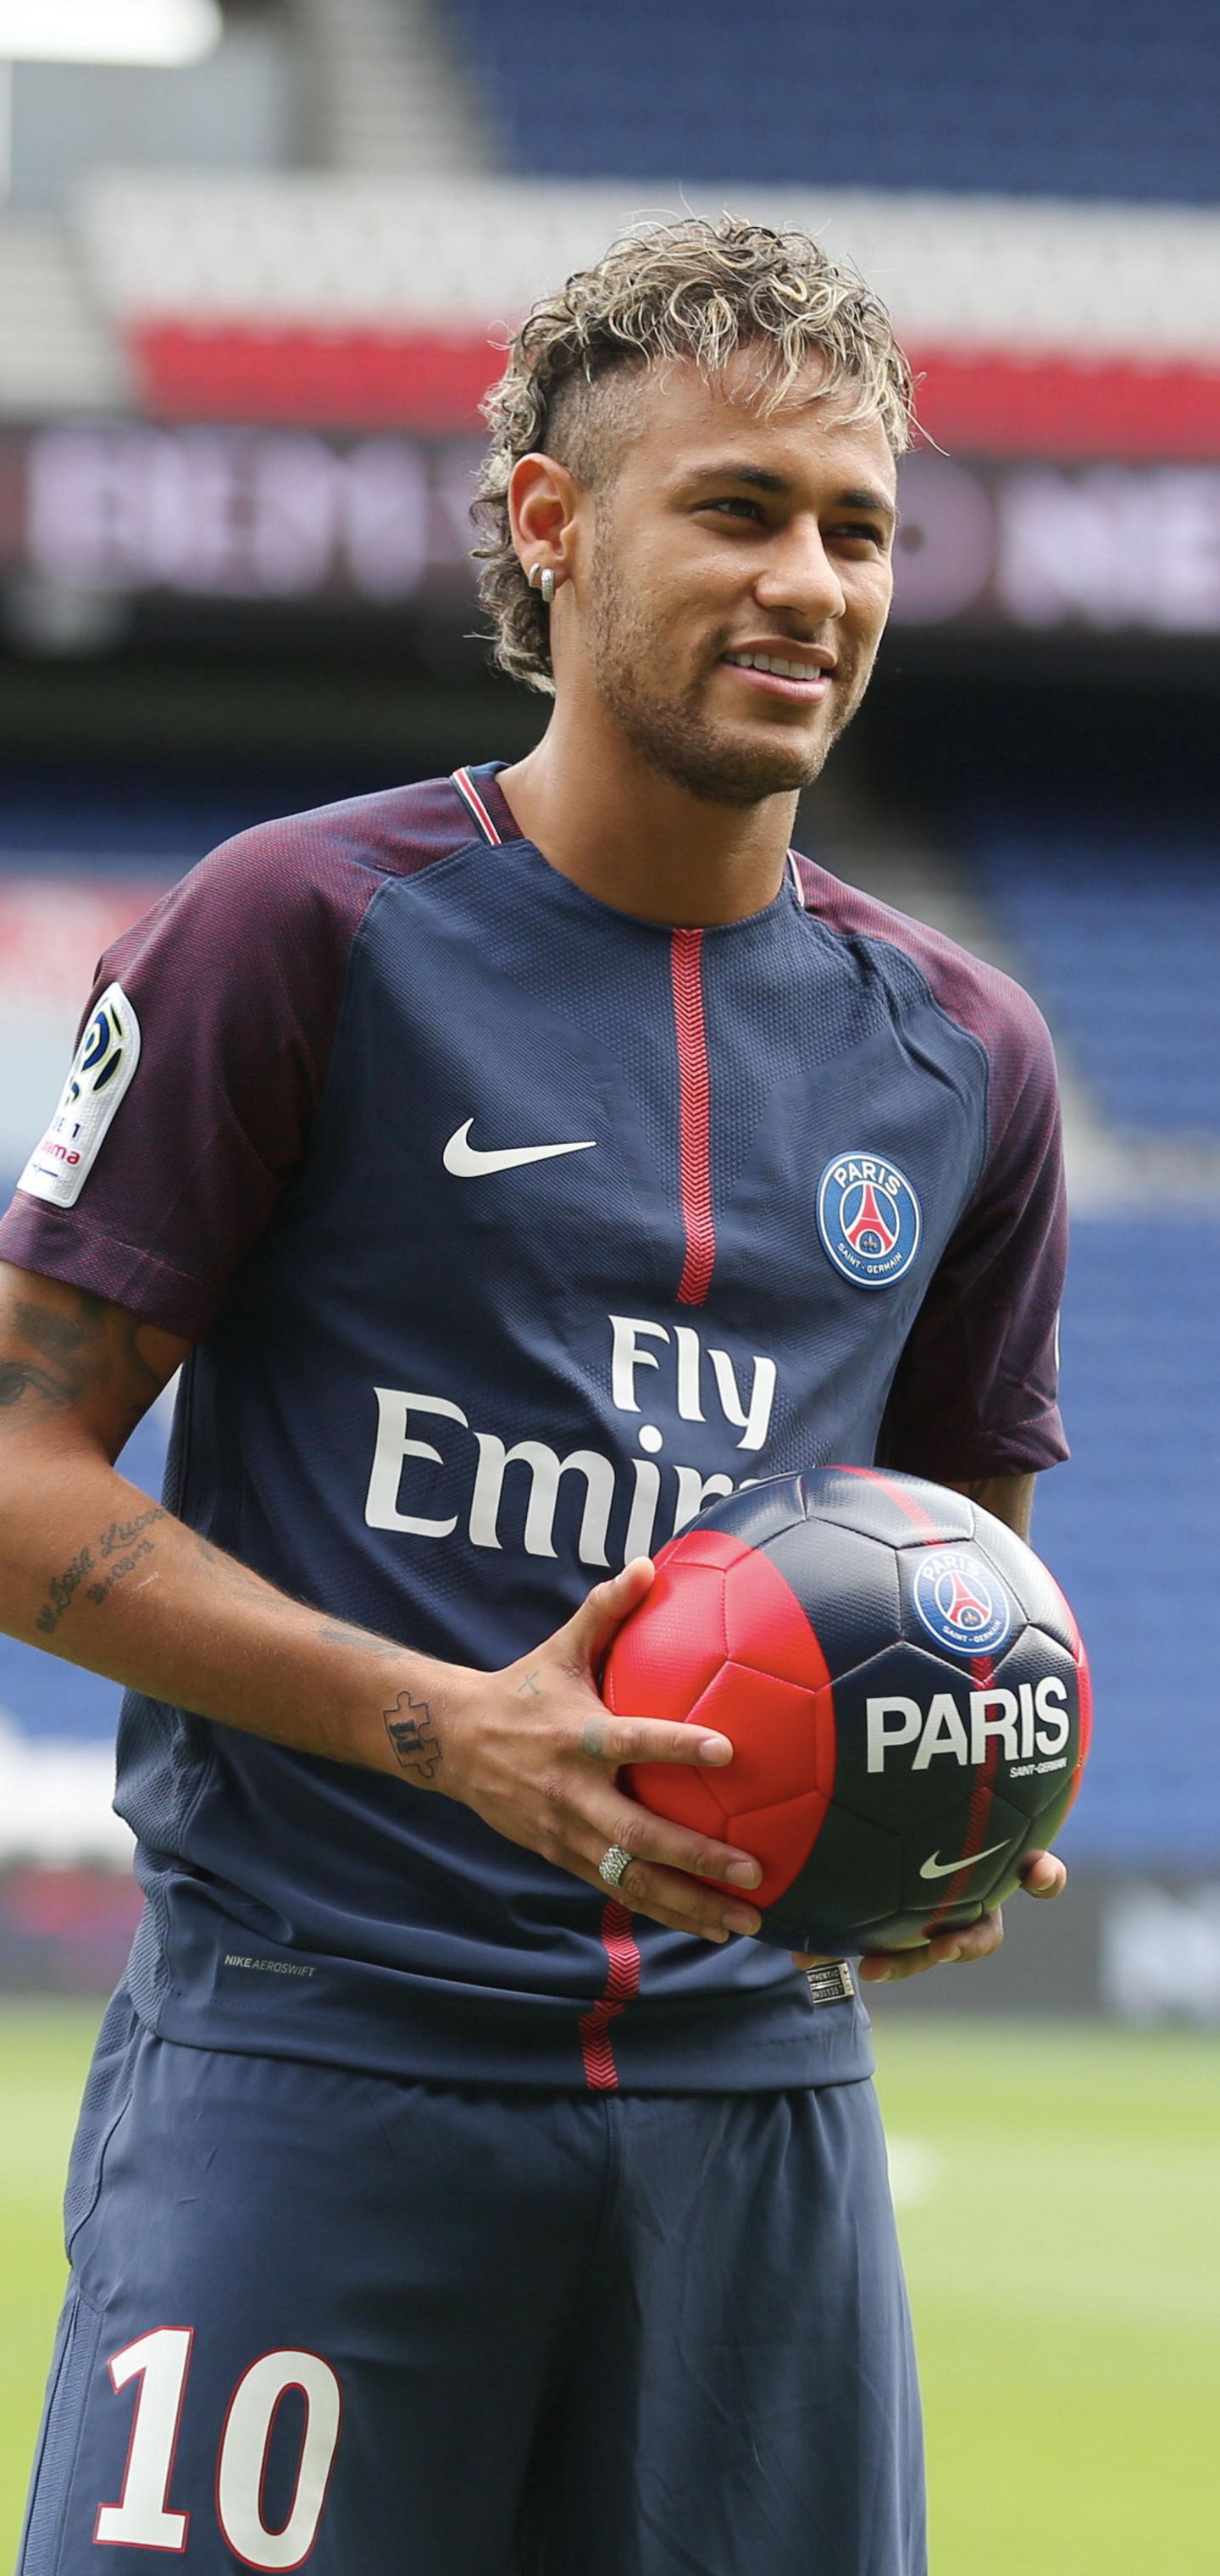 Mobile wallpaper: Sports, Soccer, Brazilian, Neymar, 1191643 download the picture for free